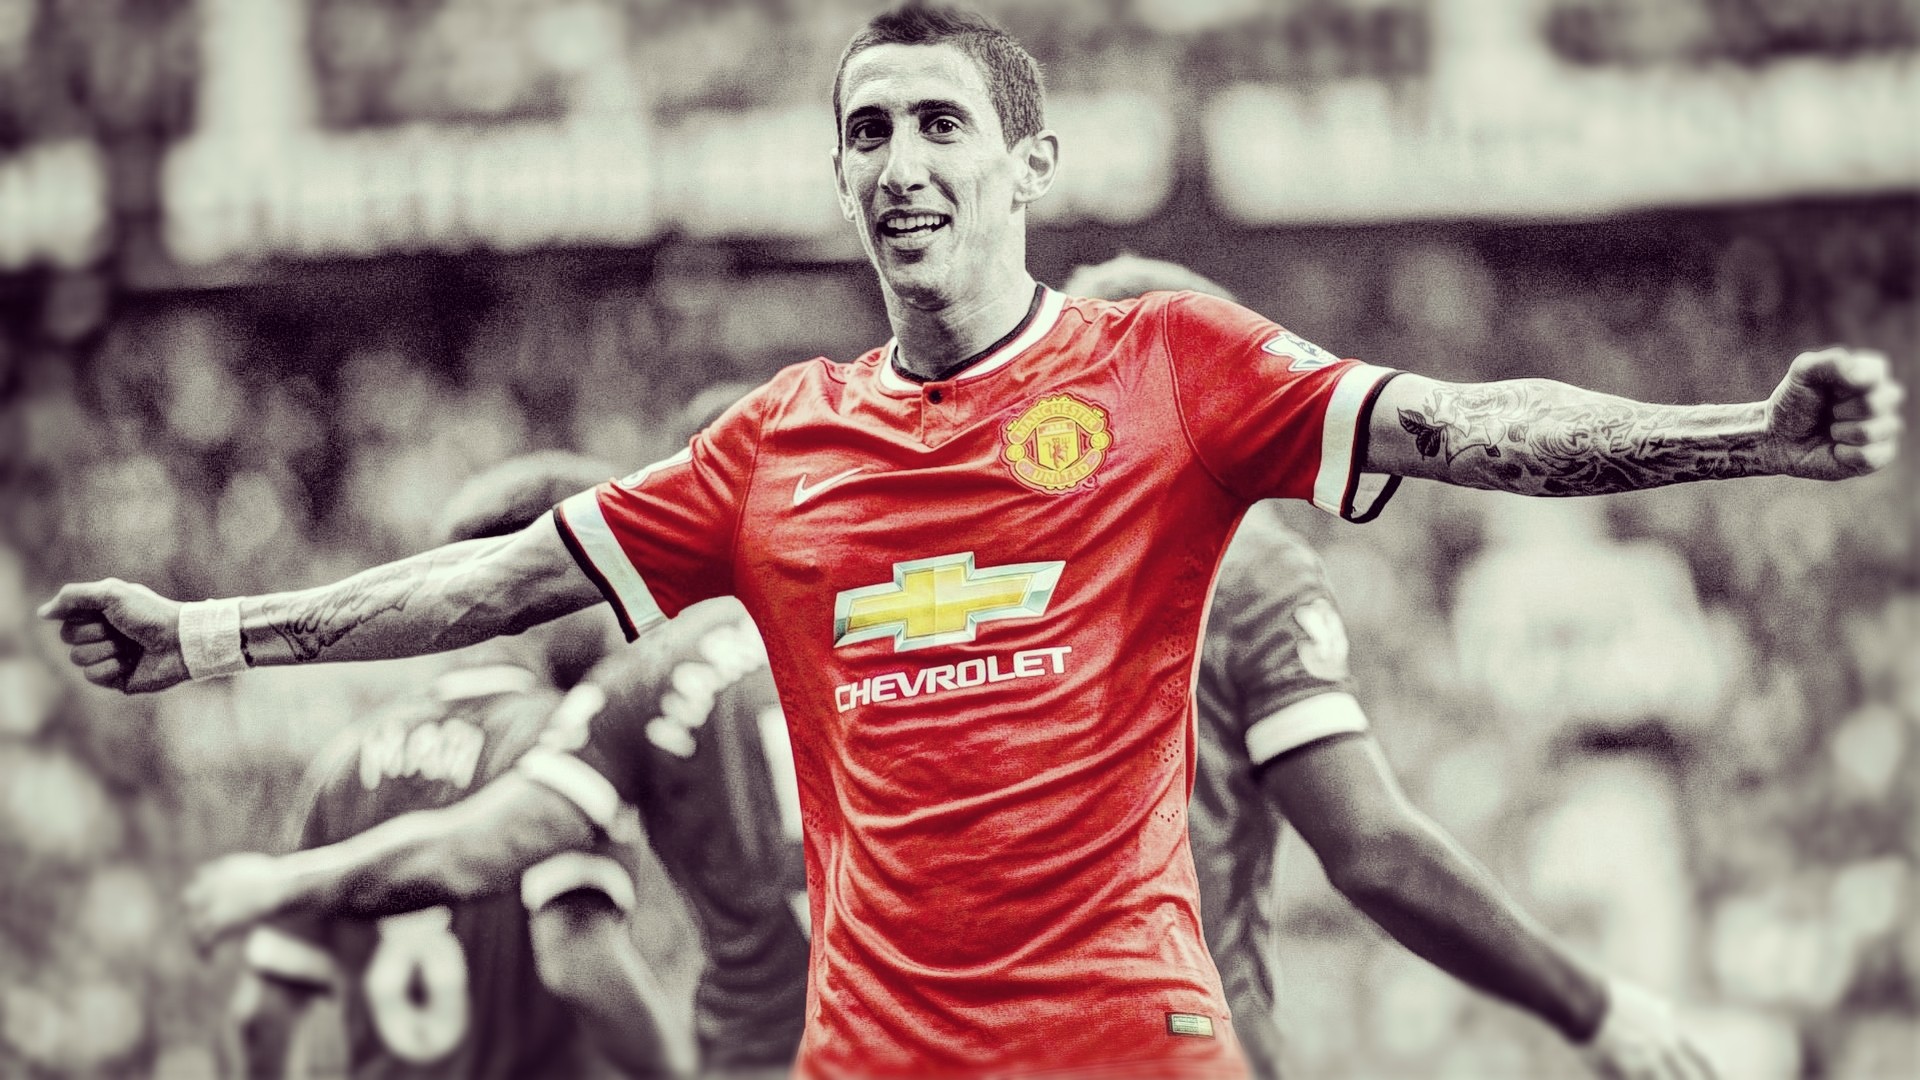 Angel Di Maria Soccer HDR Manchester United 1920x1080